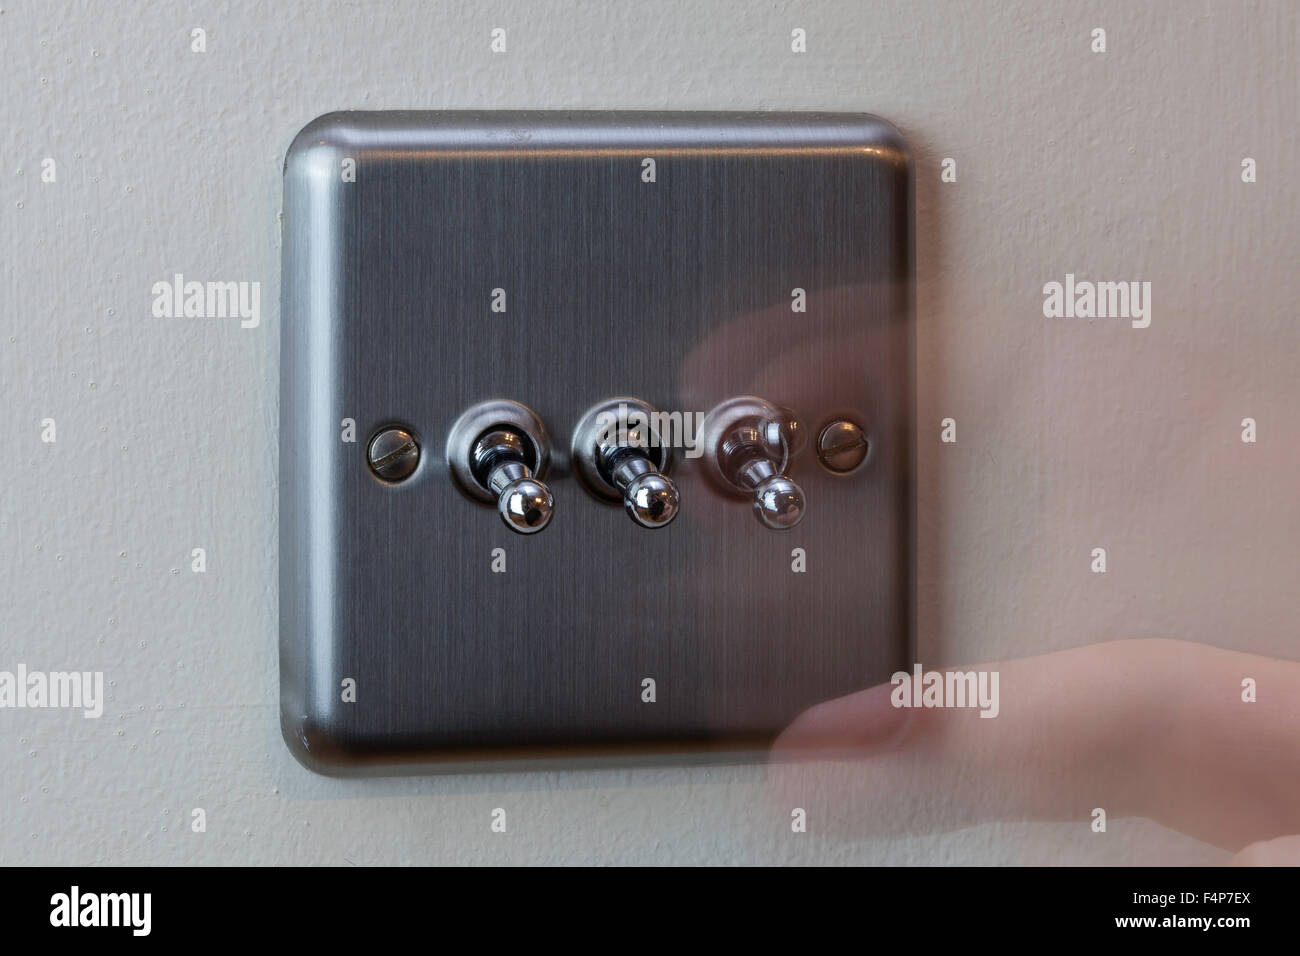 Turning the light switch on Stock Photo